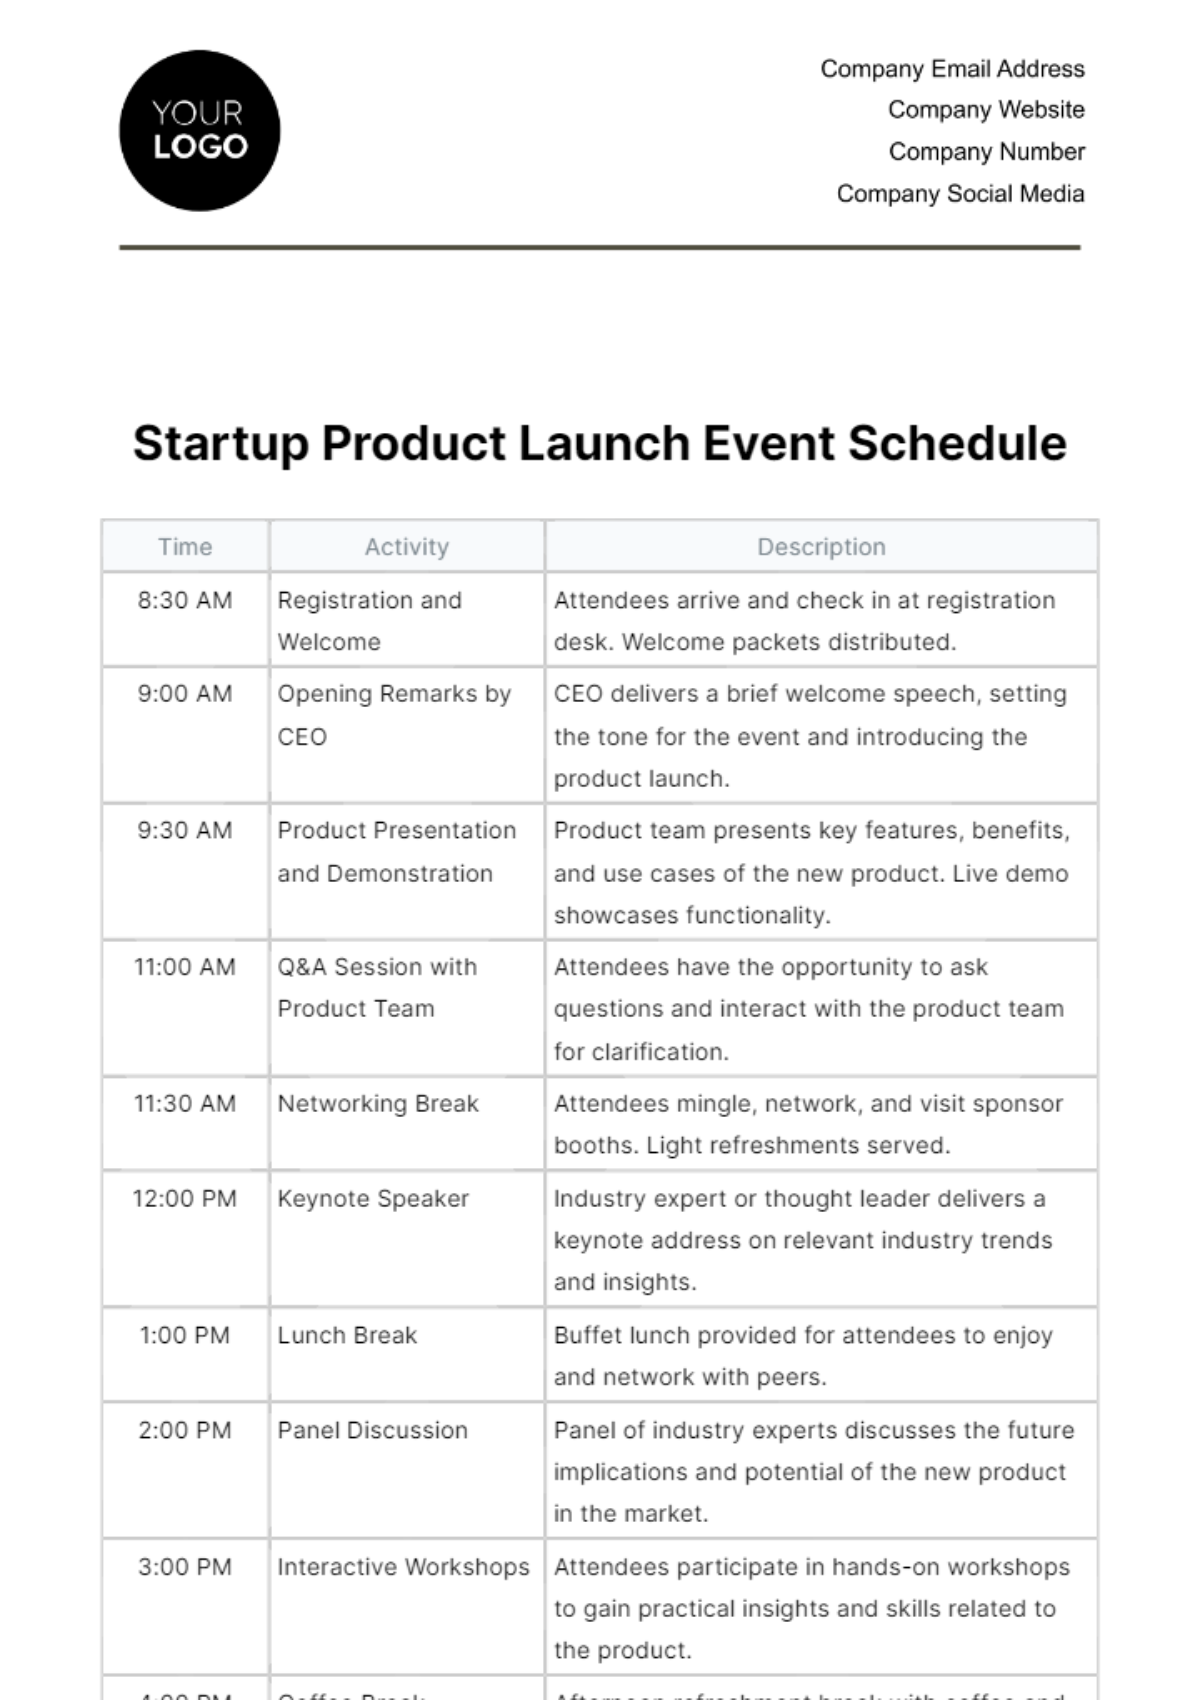 Startup Product Launch Event Schedule Template